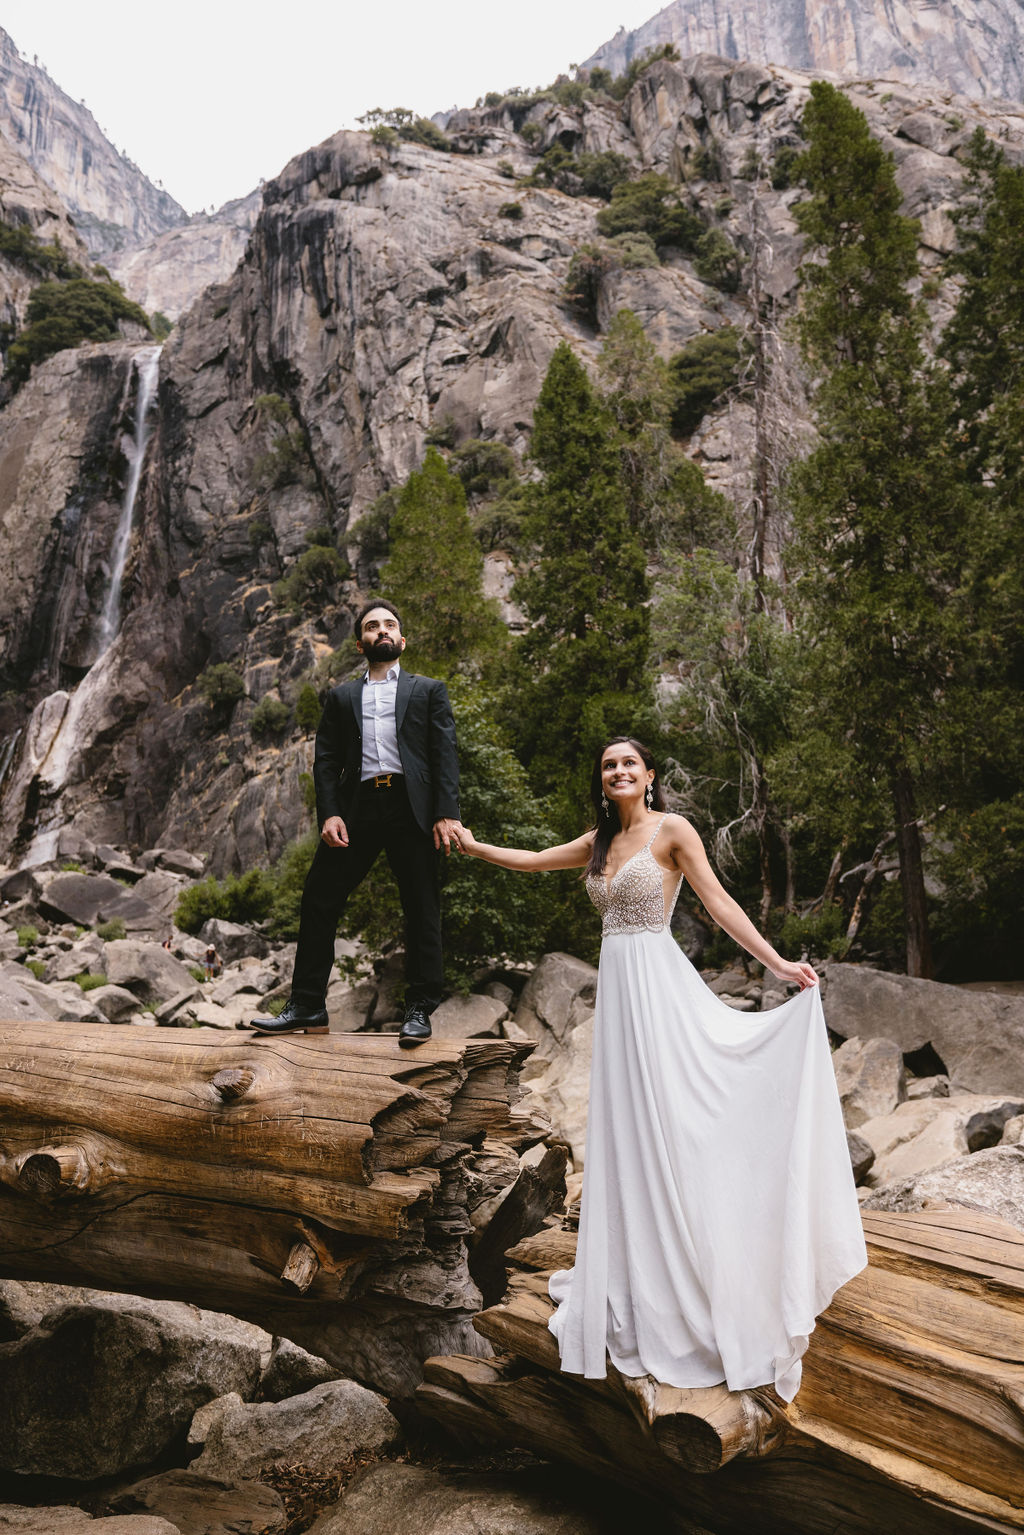 Best Yosemite National Park Locations For Your Engagement or Wedding Day